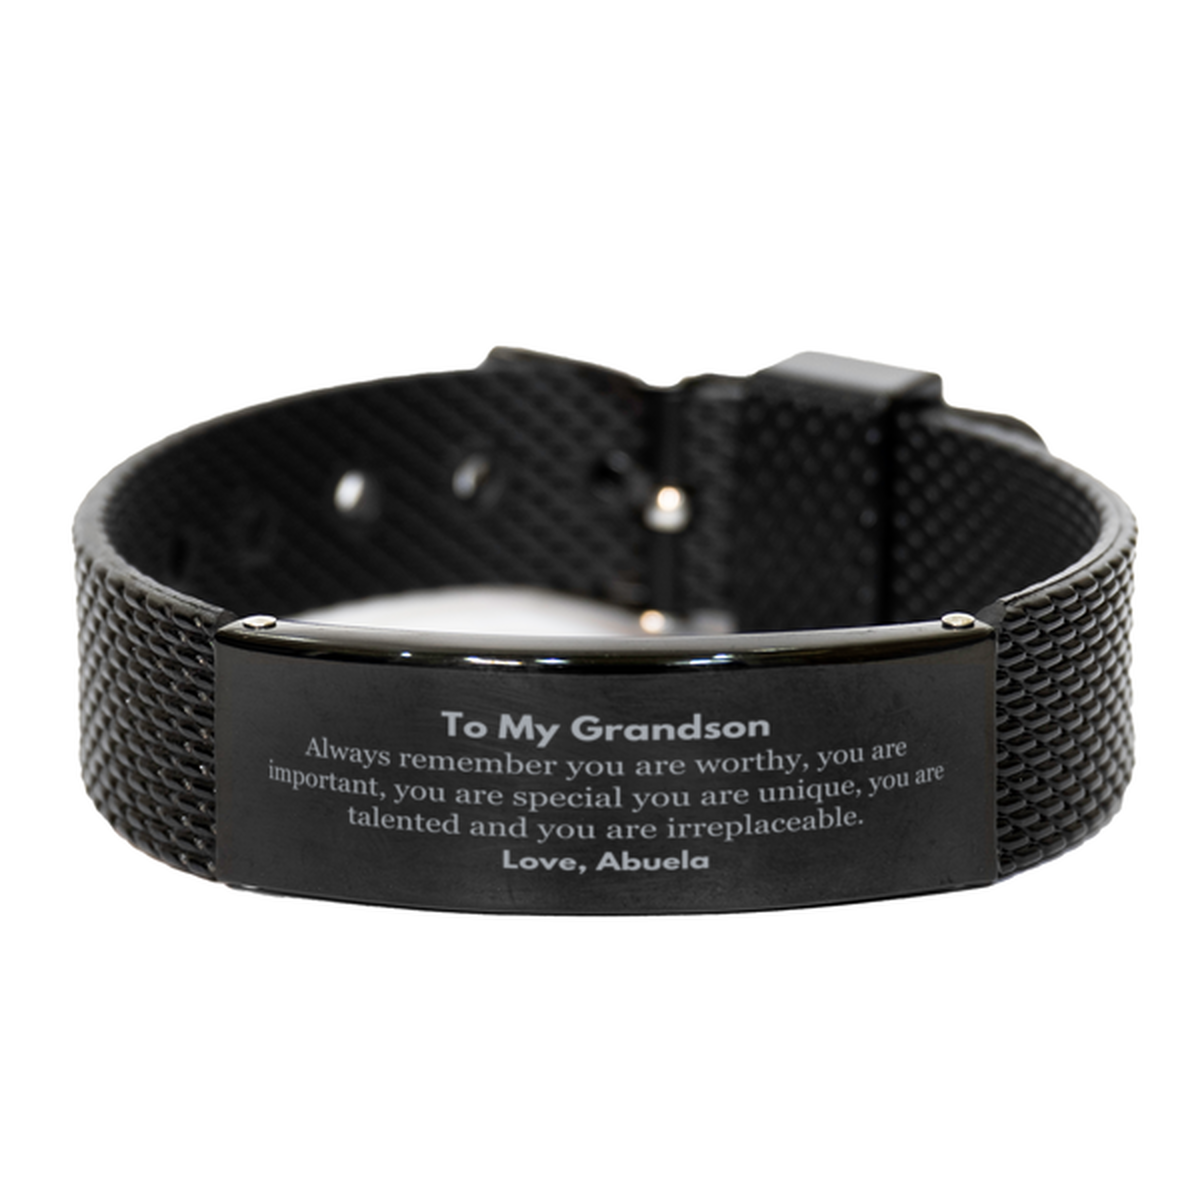 Grandson Birthday Gifts from Abuela, Inspirational Black Shark Mesh Bracelet for Grandson Christmas Graduation Gifts for Grandson Always remember you are worthy, you are important. Love, Abuela